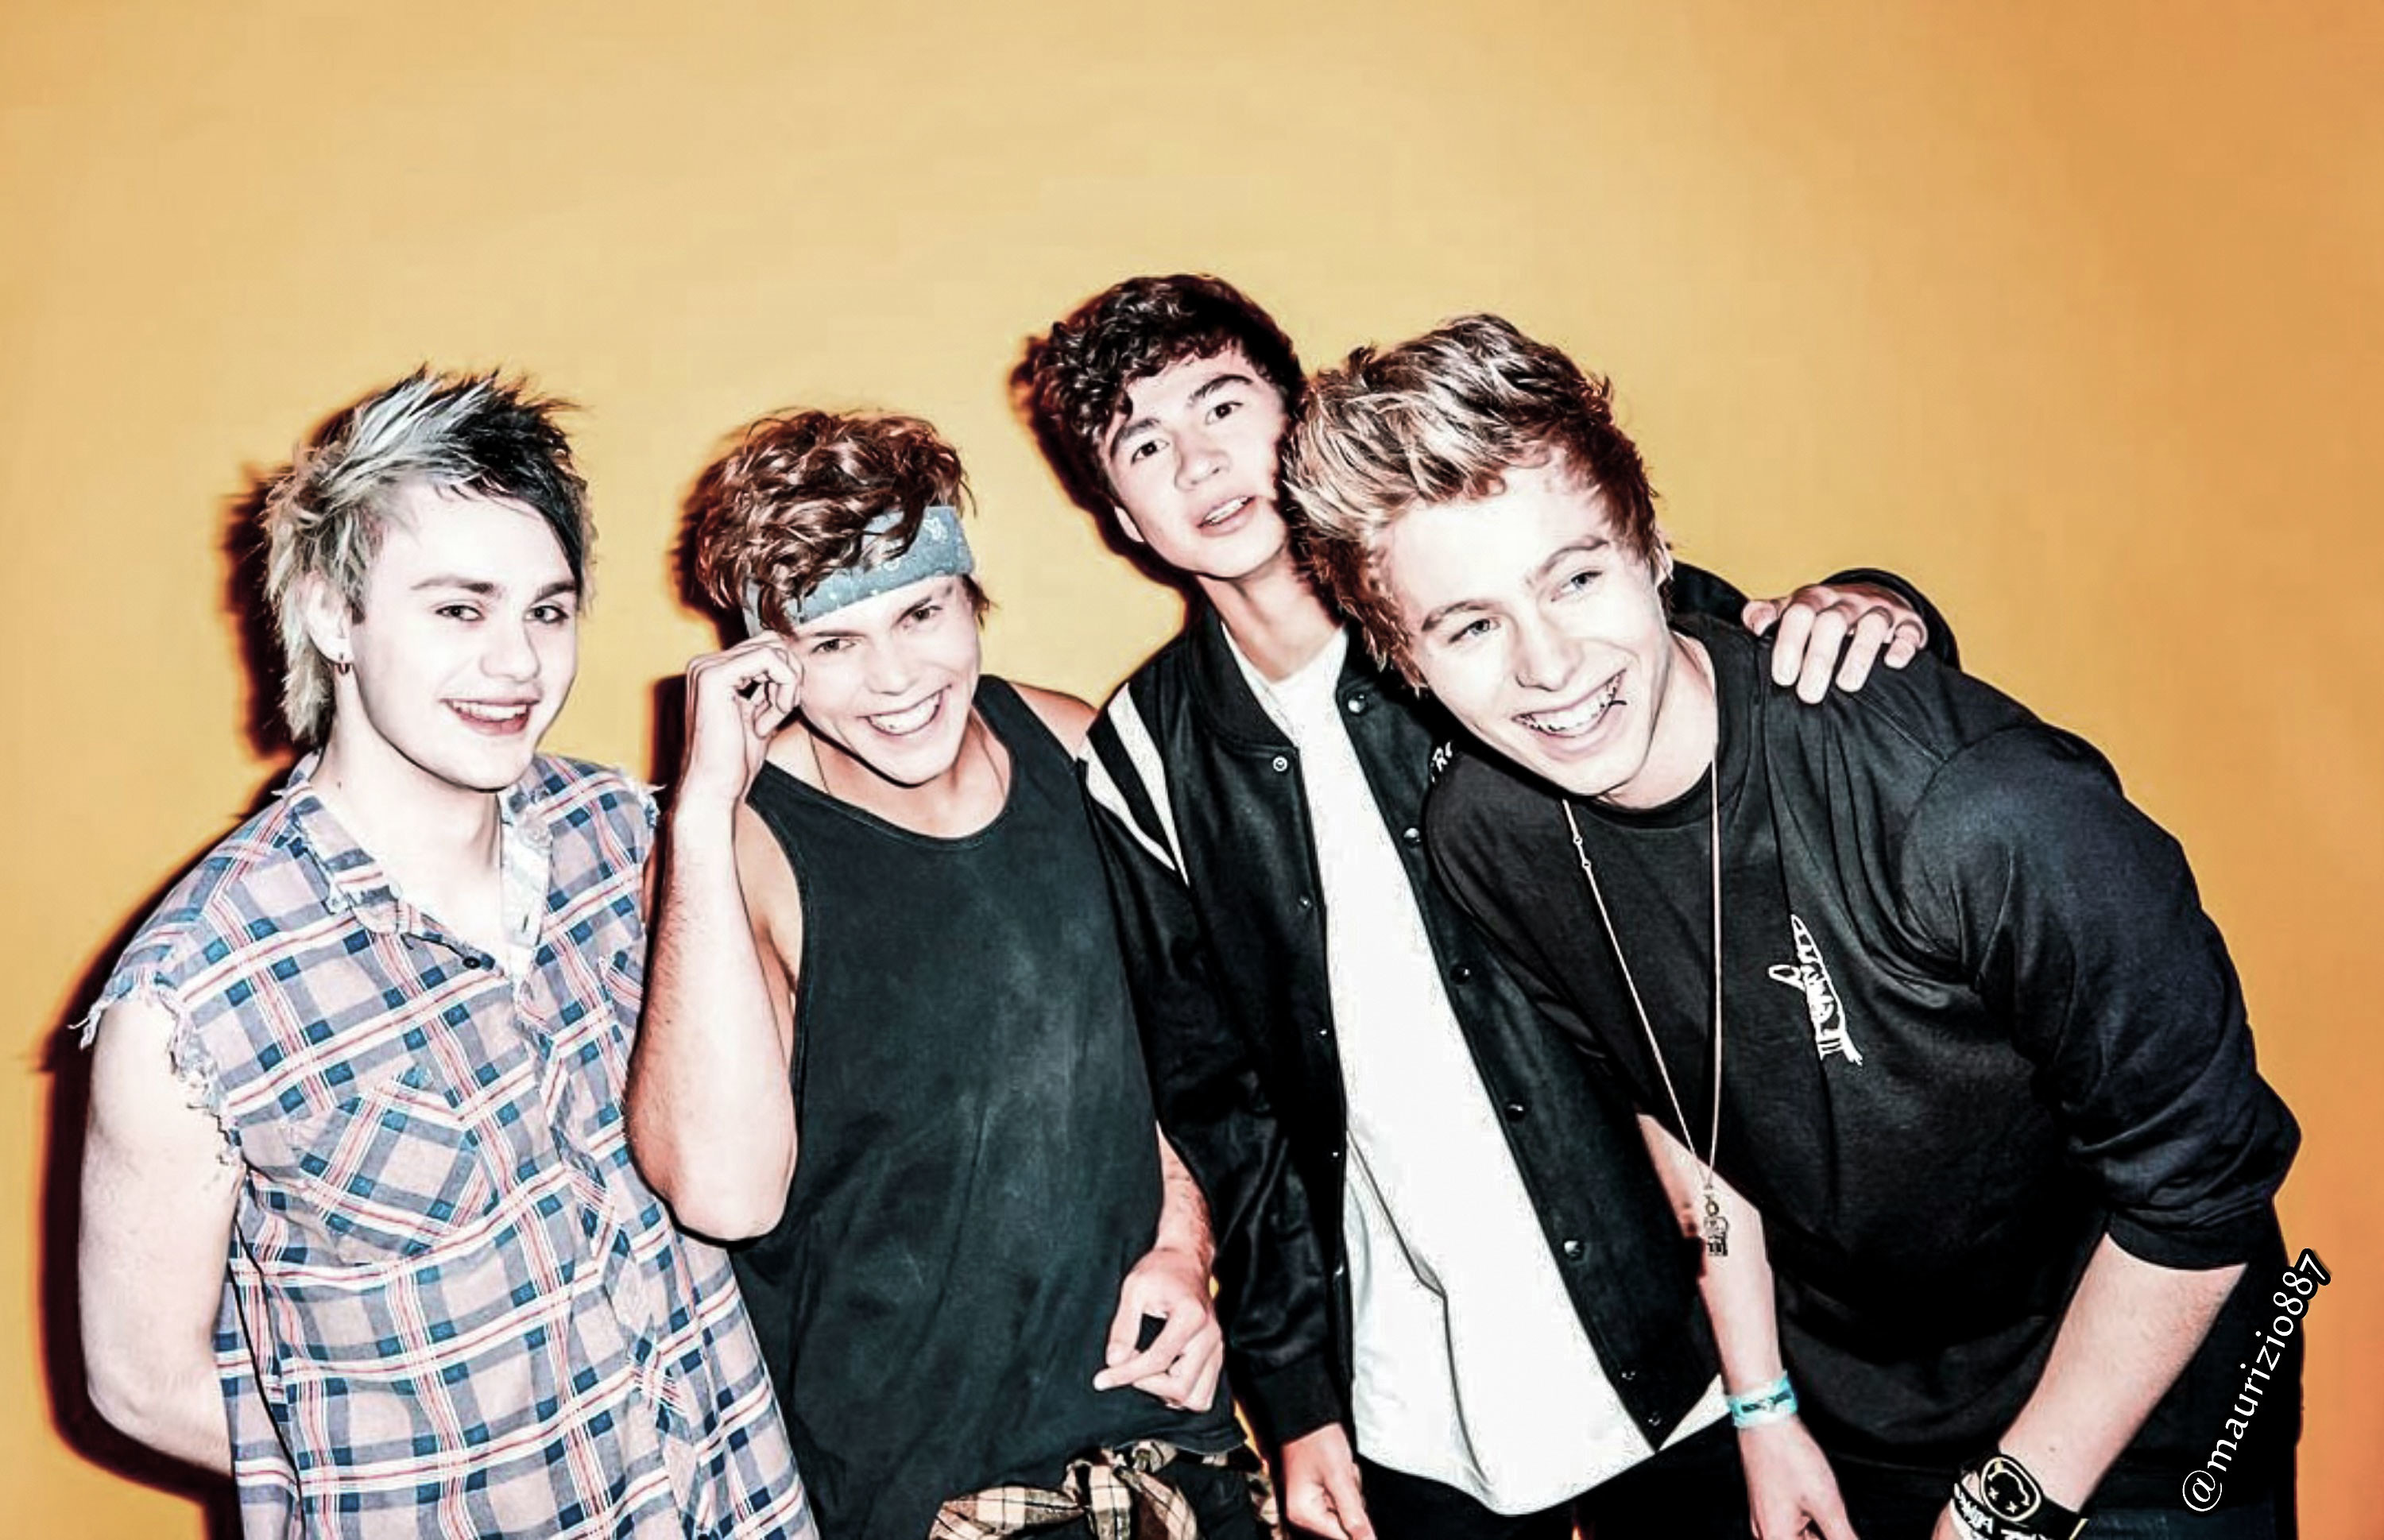 3000x1938 5 Seconds of Summer images 5SOS ,2014 HD wallpaper and background photos